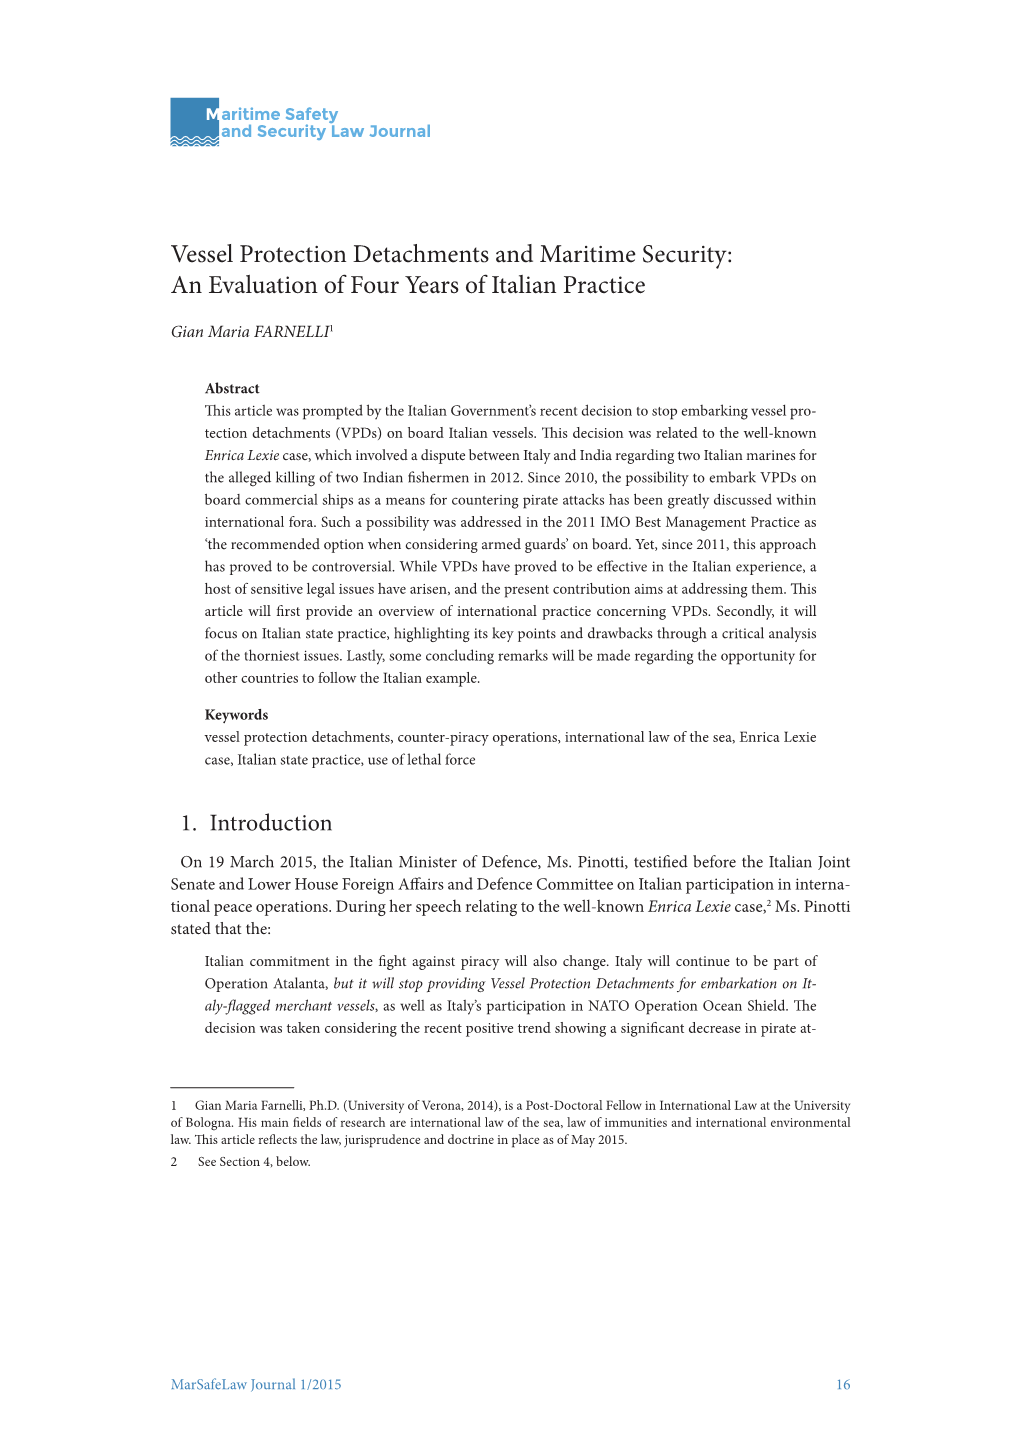 Vessel Protection Detachments and Maritime Security: an Evaluation of Four Years of Italian Practice